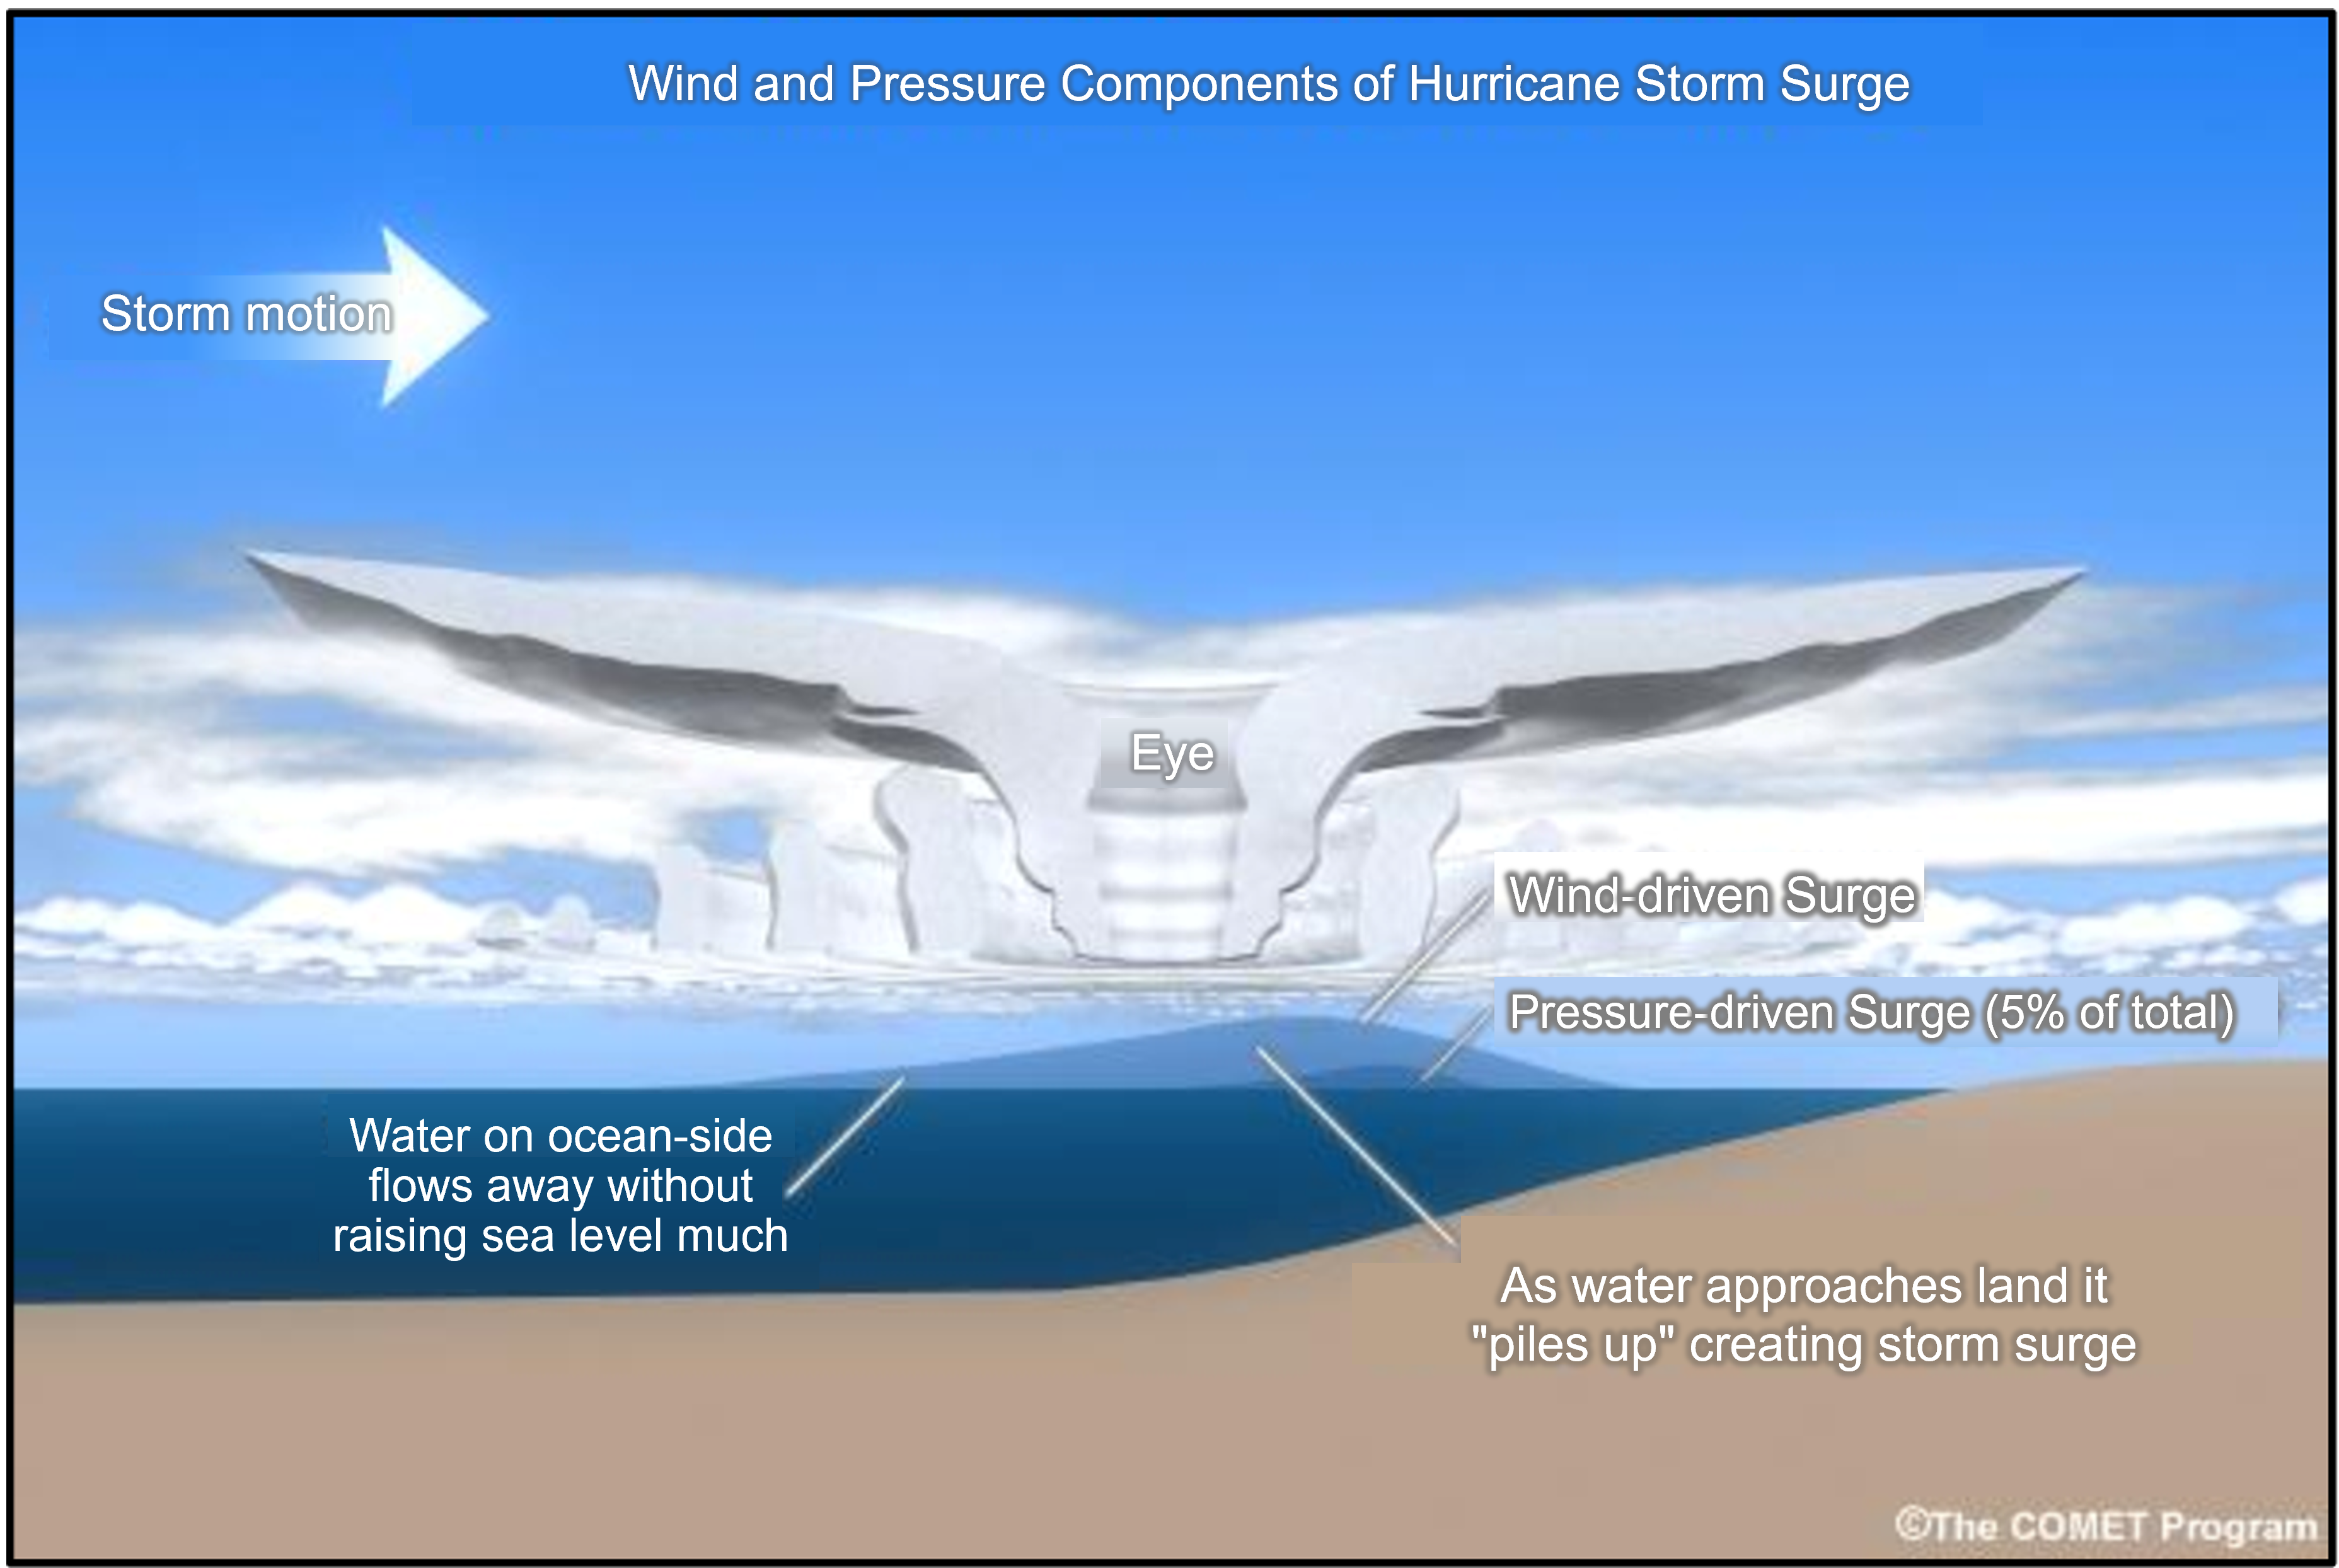 Figure 4.4.5.4 Illustration of wind and pressure components of storm surge